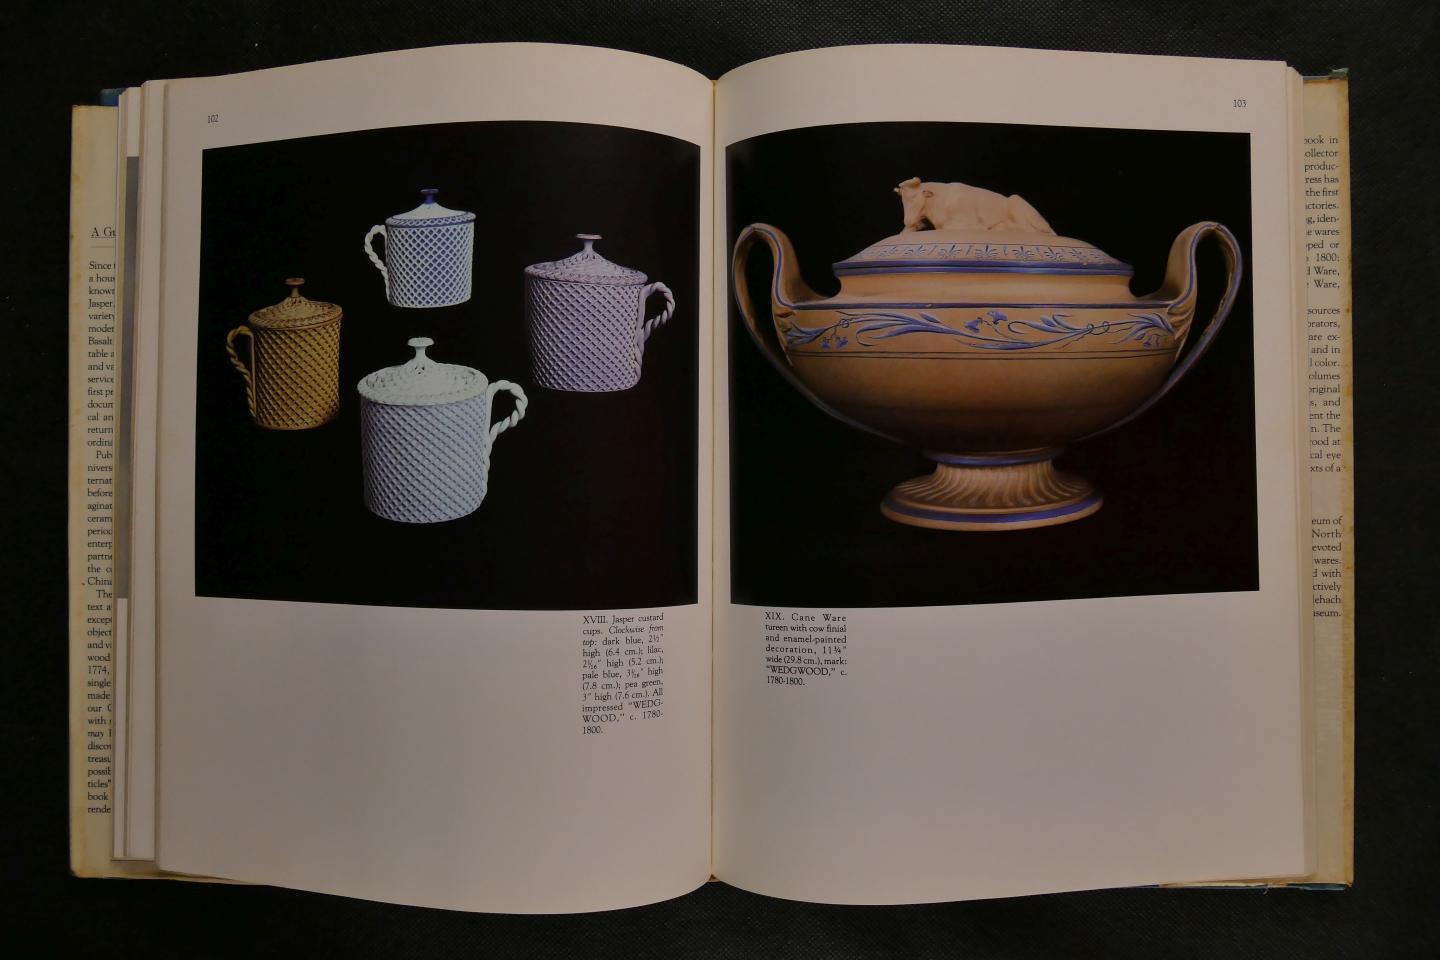 Buten, David - 18th Century wedgwood. A guide for Collectors & Connoisseurs (4 foto's)